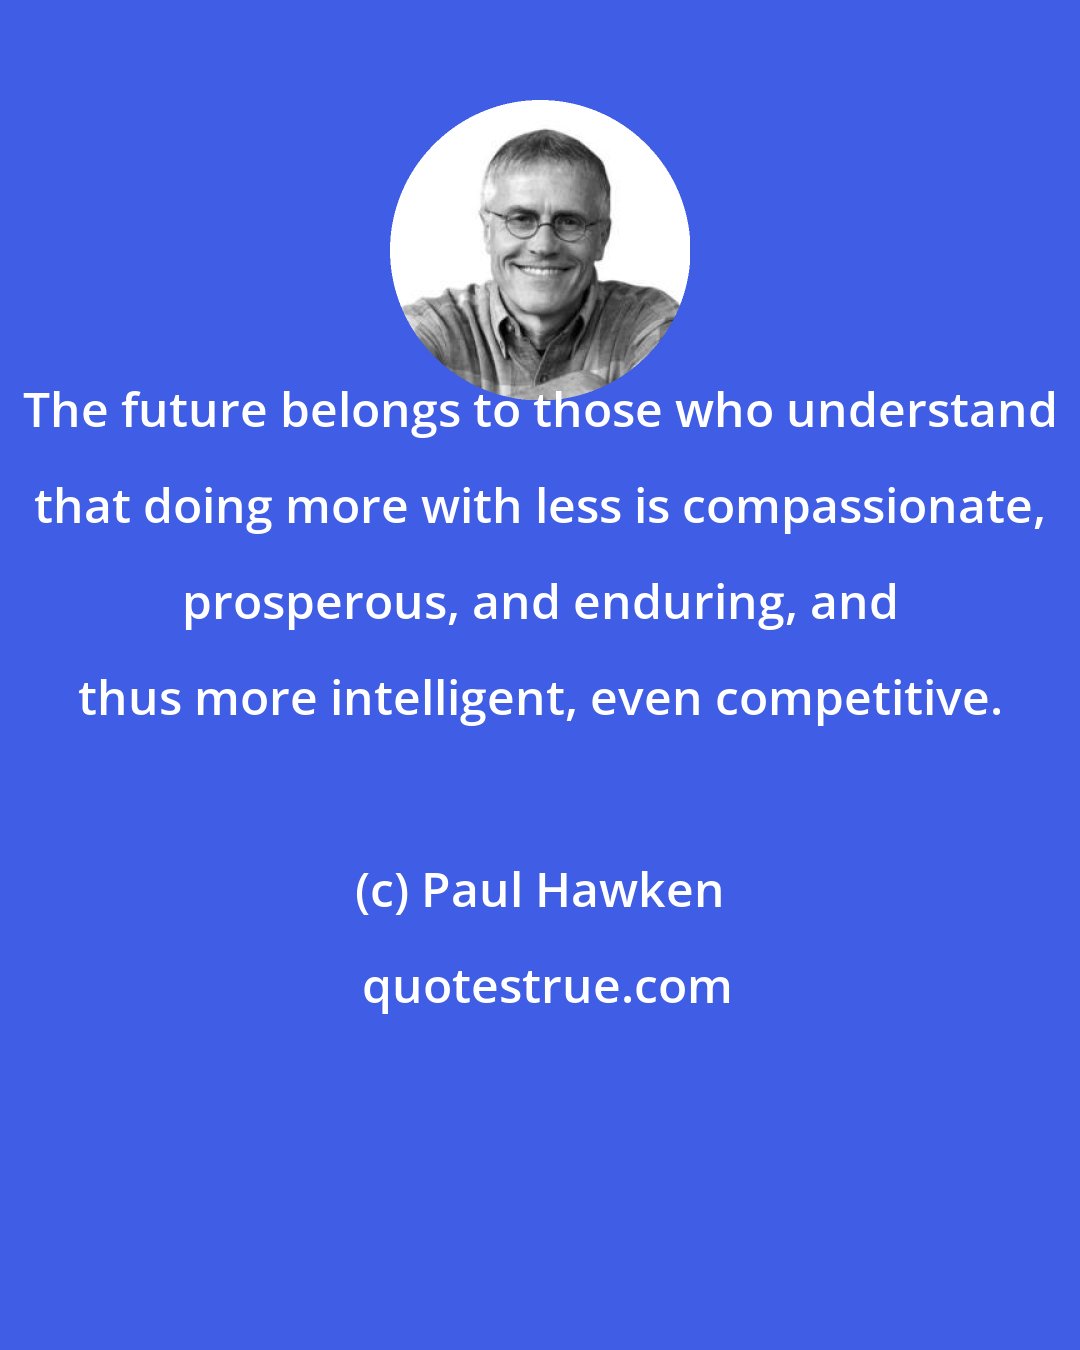 Paul Hawken: The future belongs to those who understand that doing more with less is compassionate, prosperous, and enduring, and thus more intelligent, even competitive.